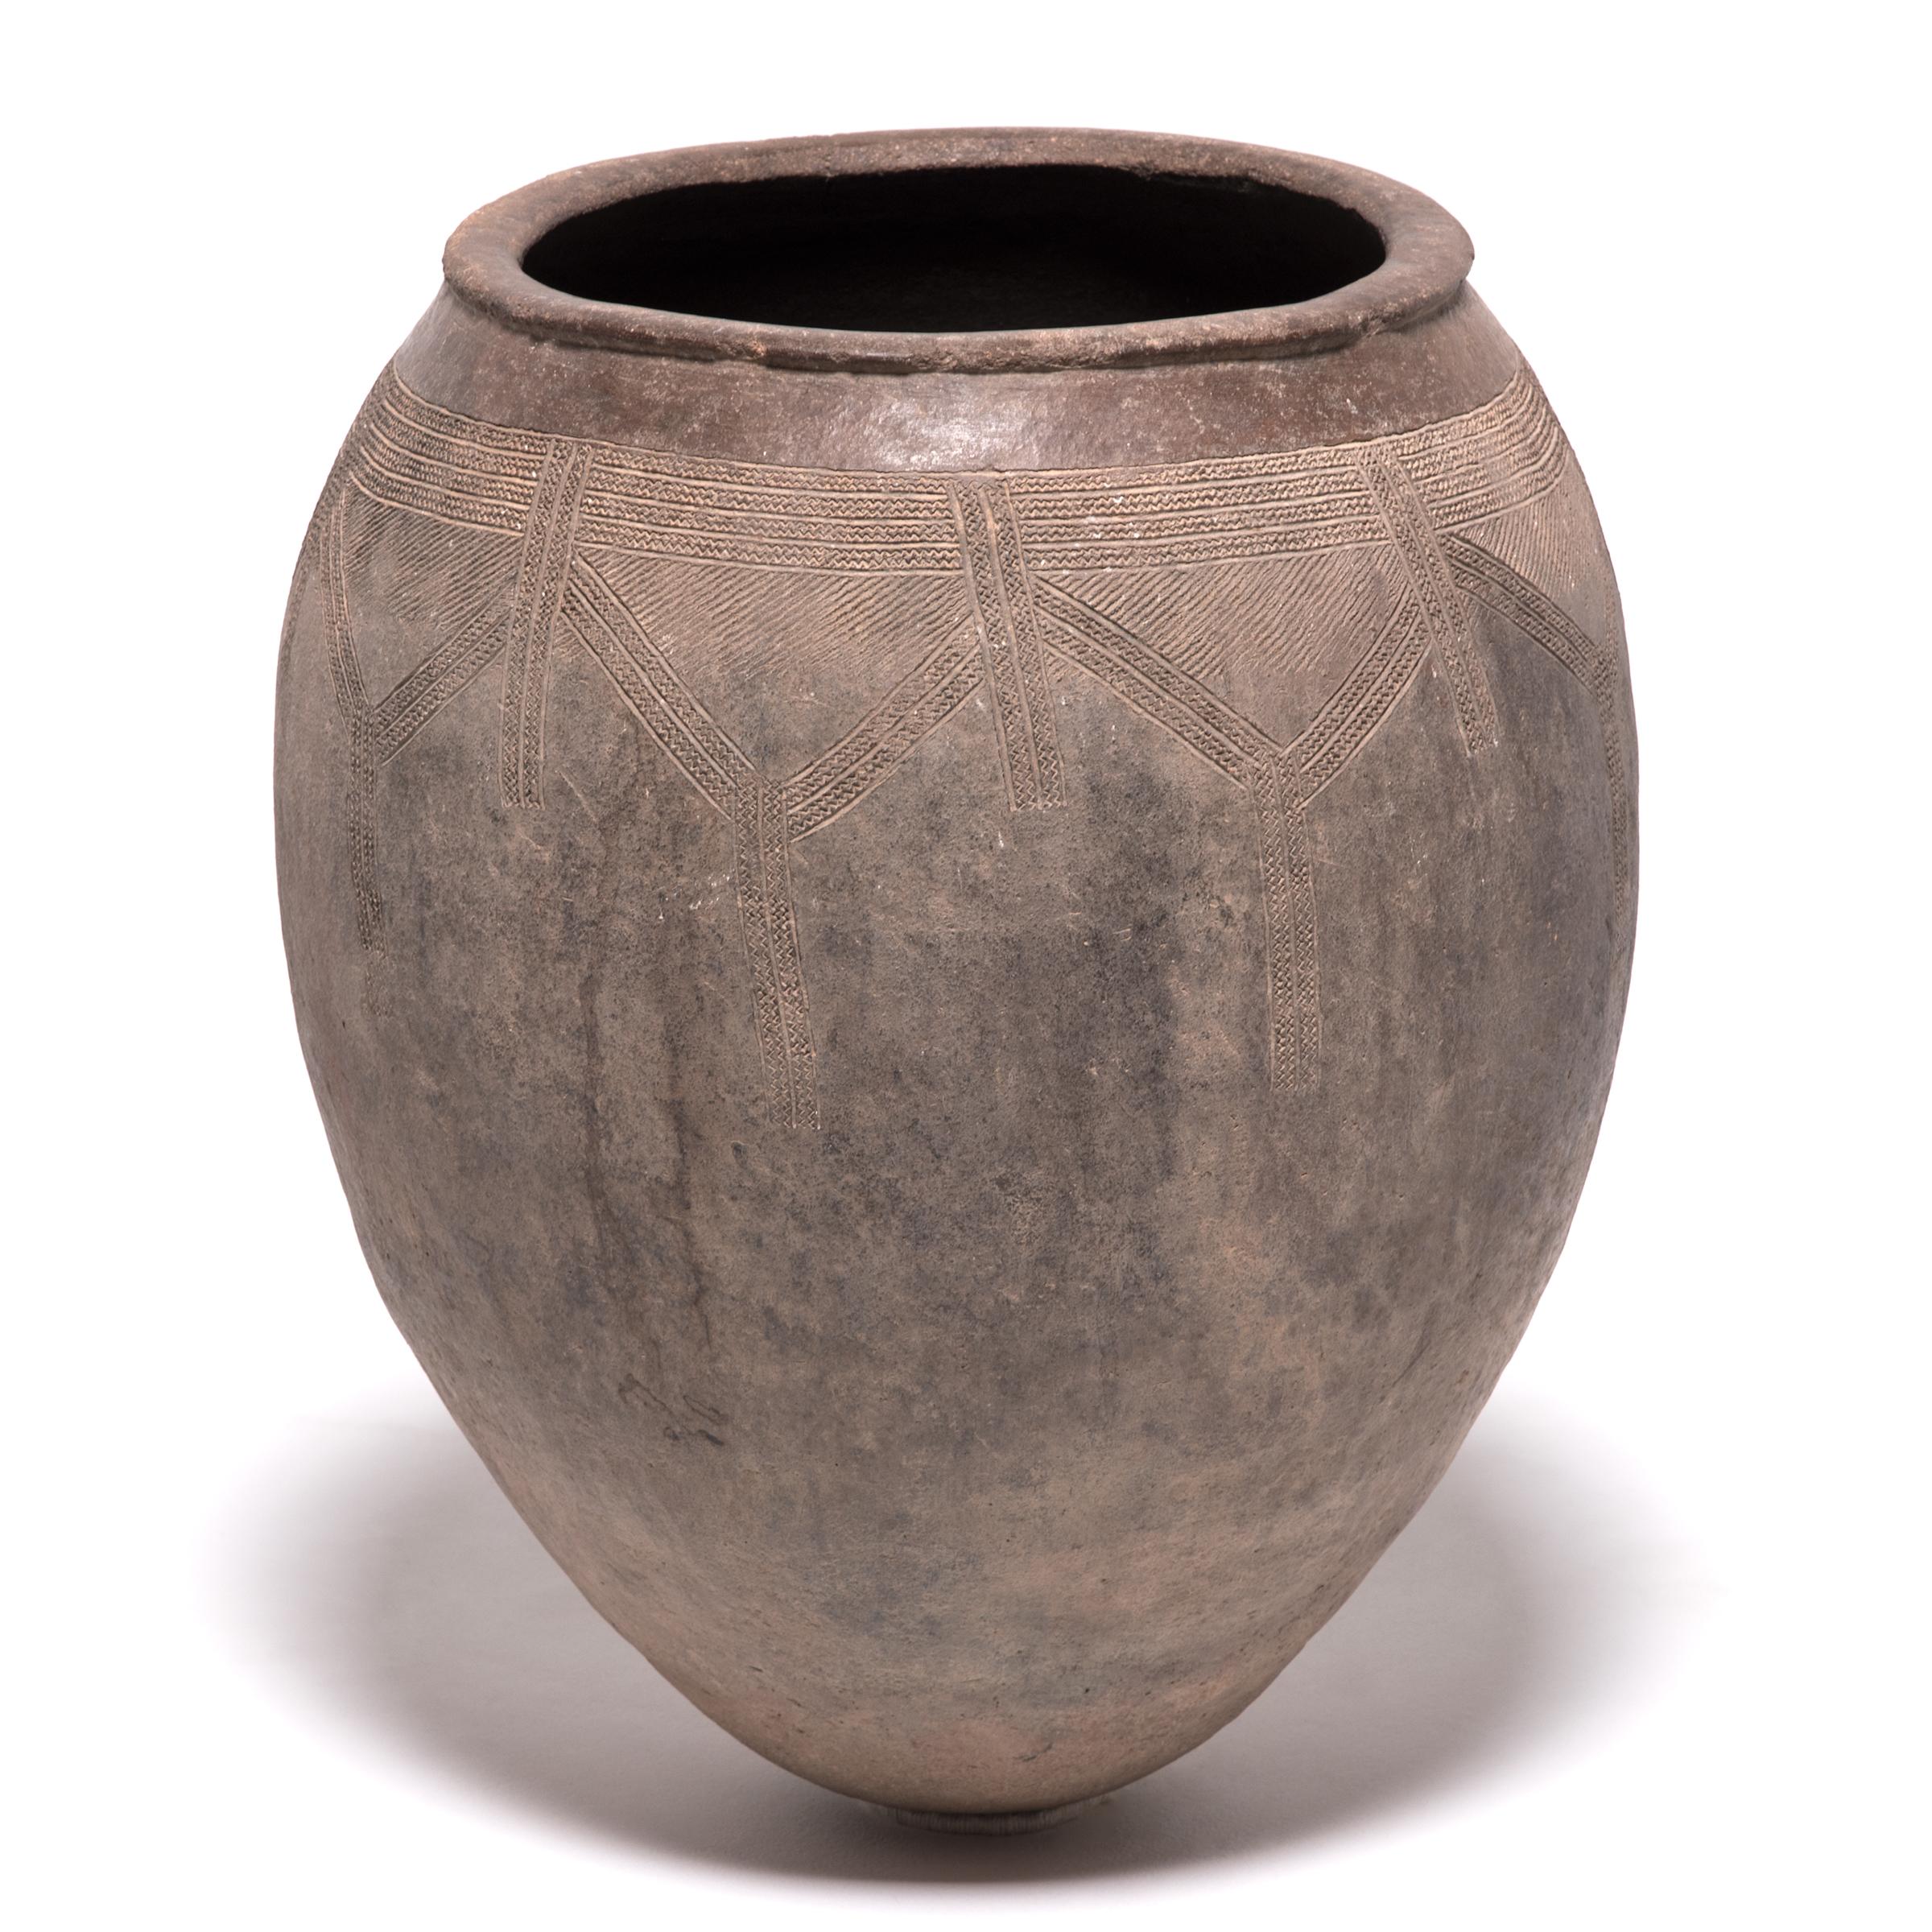 Ovoid pots were an elegant storage solution in African tribal life. This beautifully balanced example is attributed to the Toussian people of Western Burkina Faso. Masterfully made to protect its contents from the elements, pots such as this one